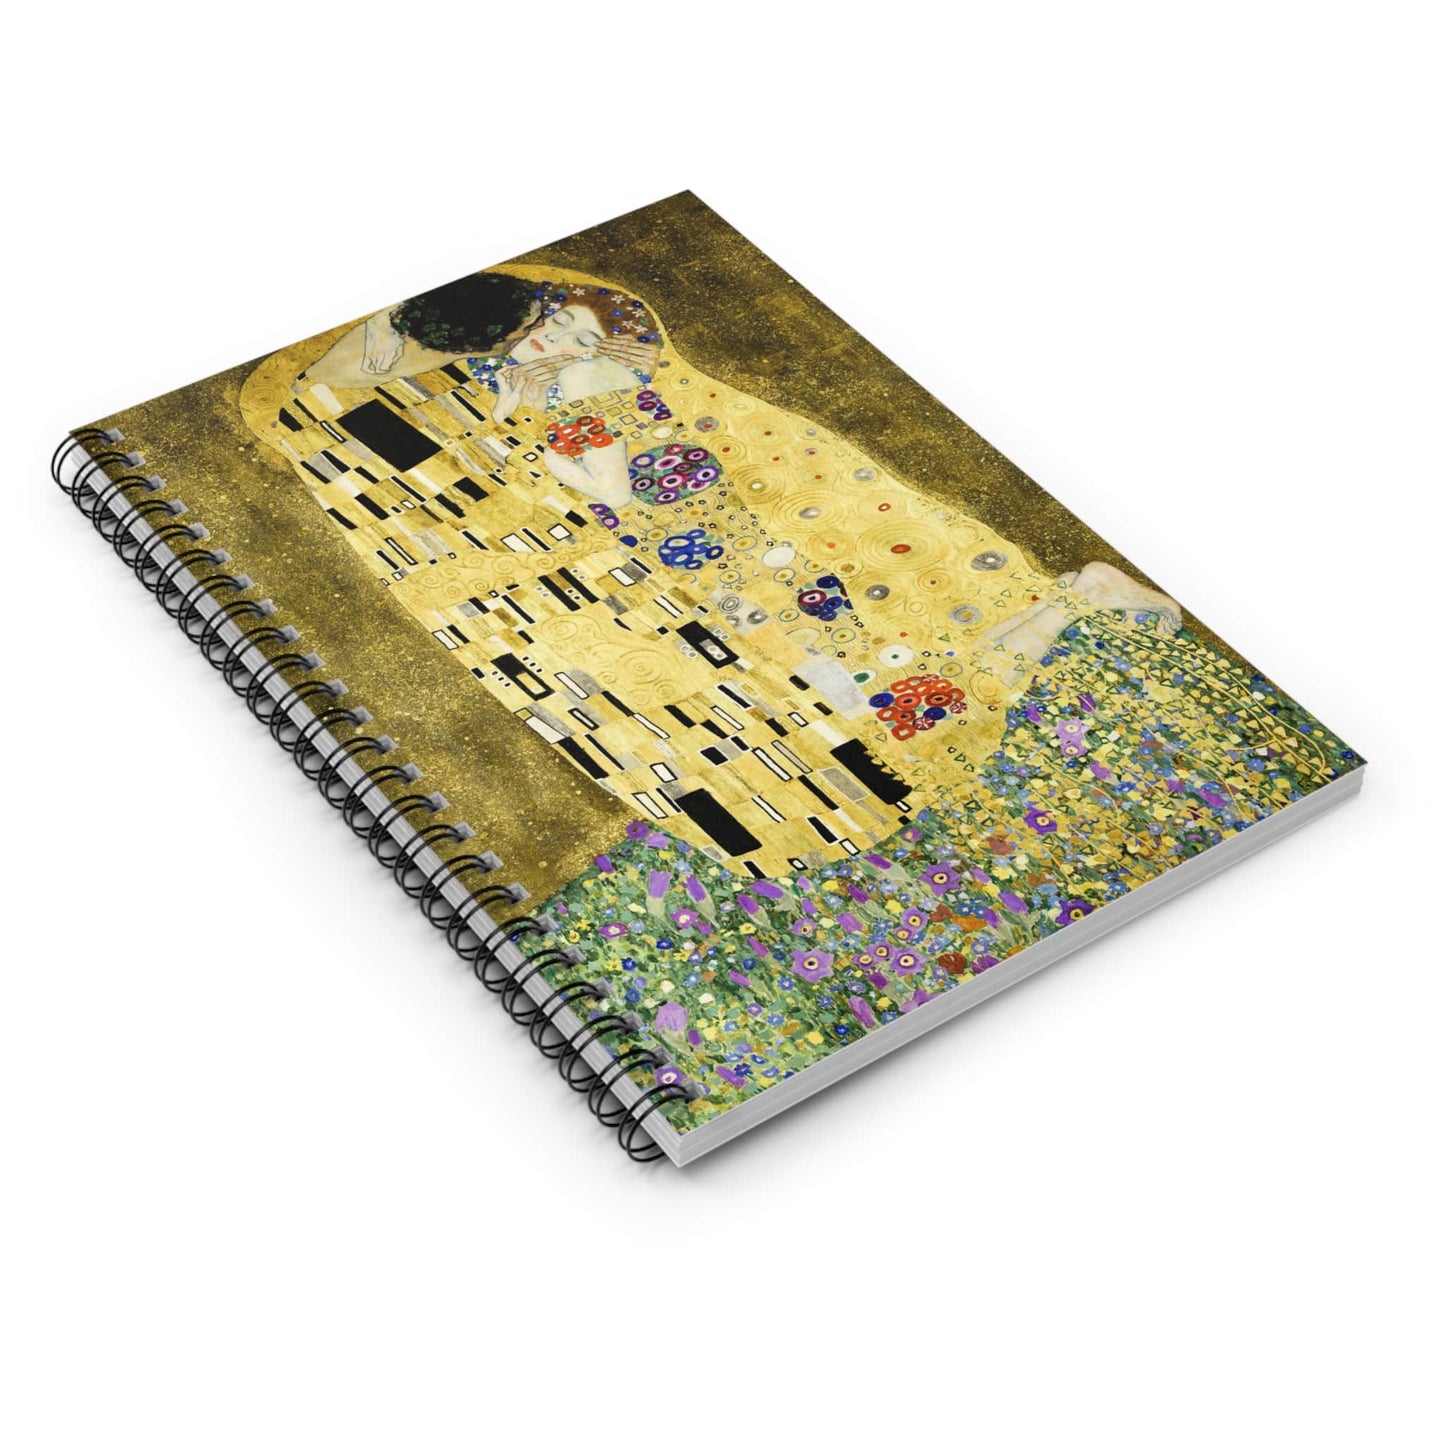 Famous Kissing Spiral Notebook Laying Flat on White Surface